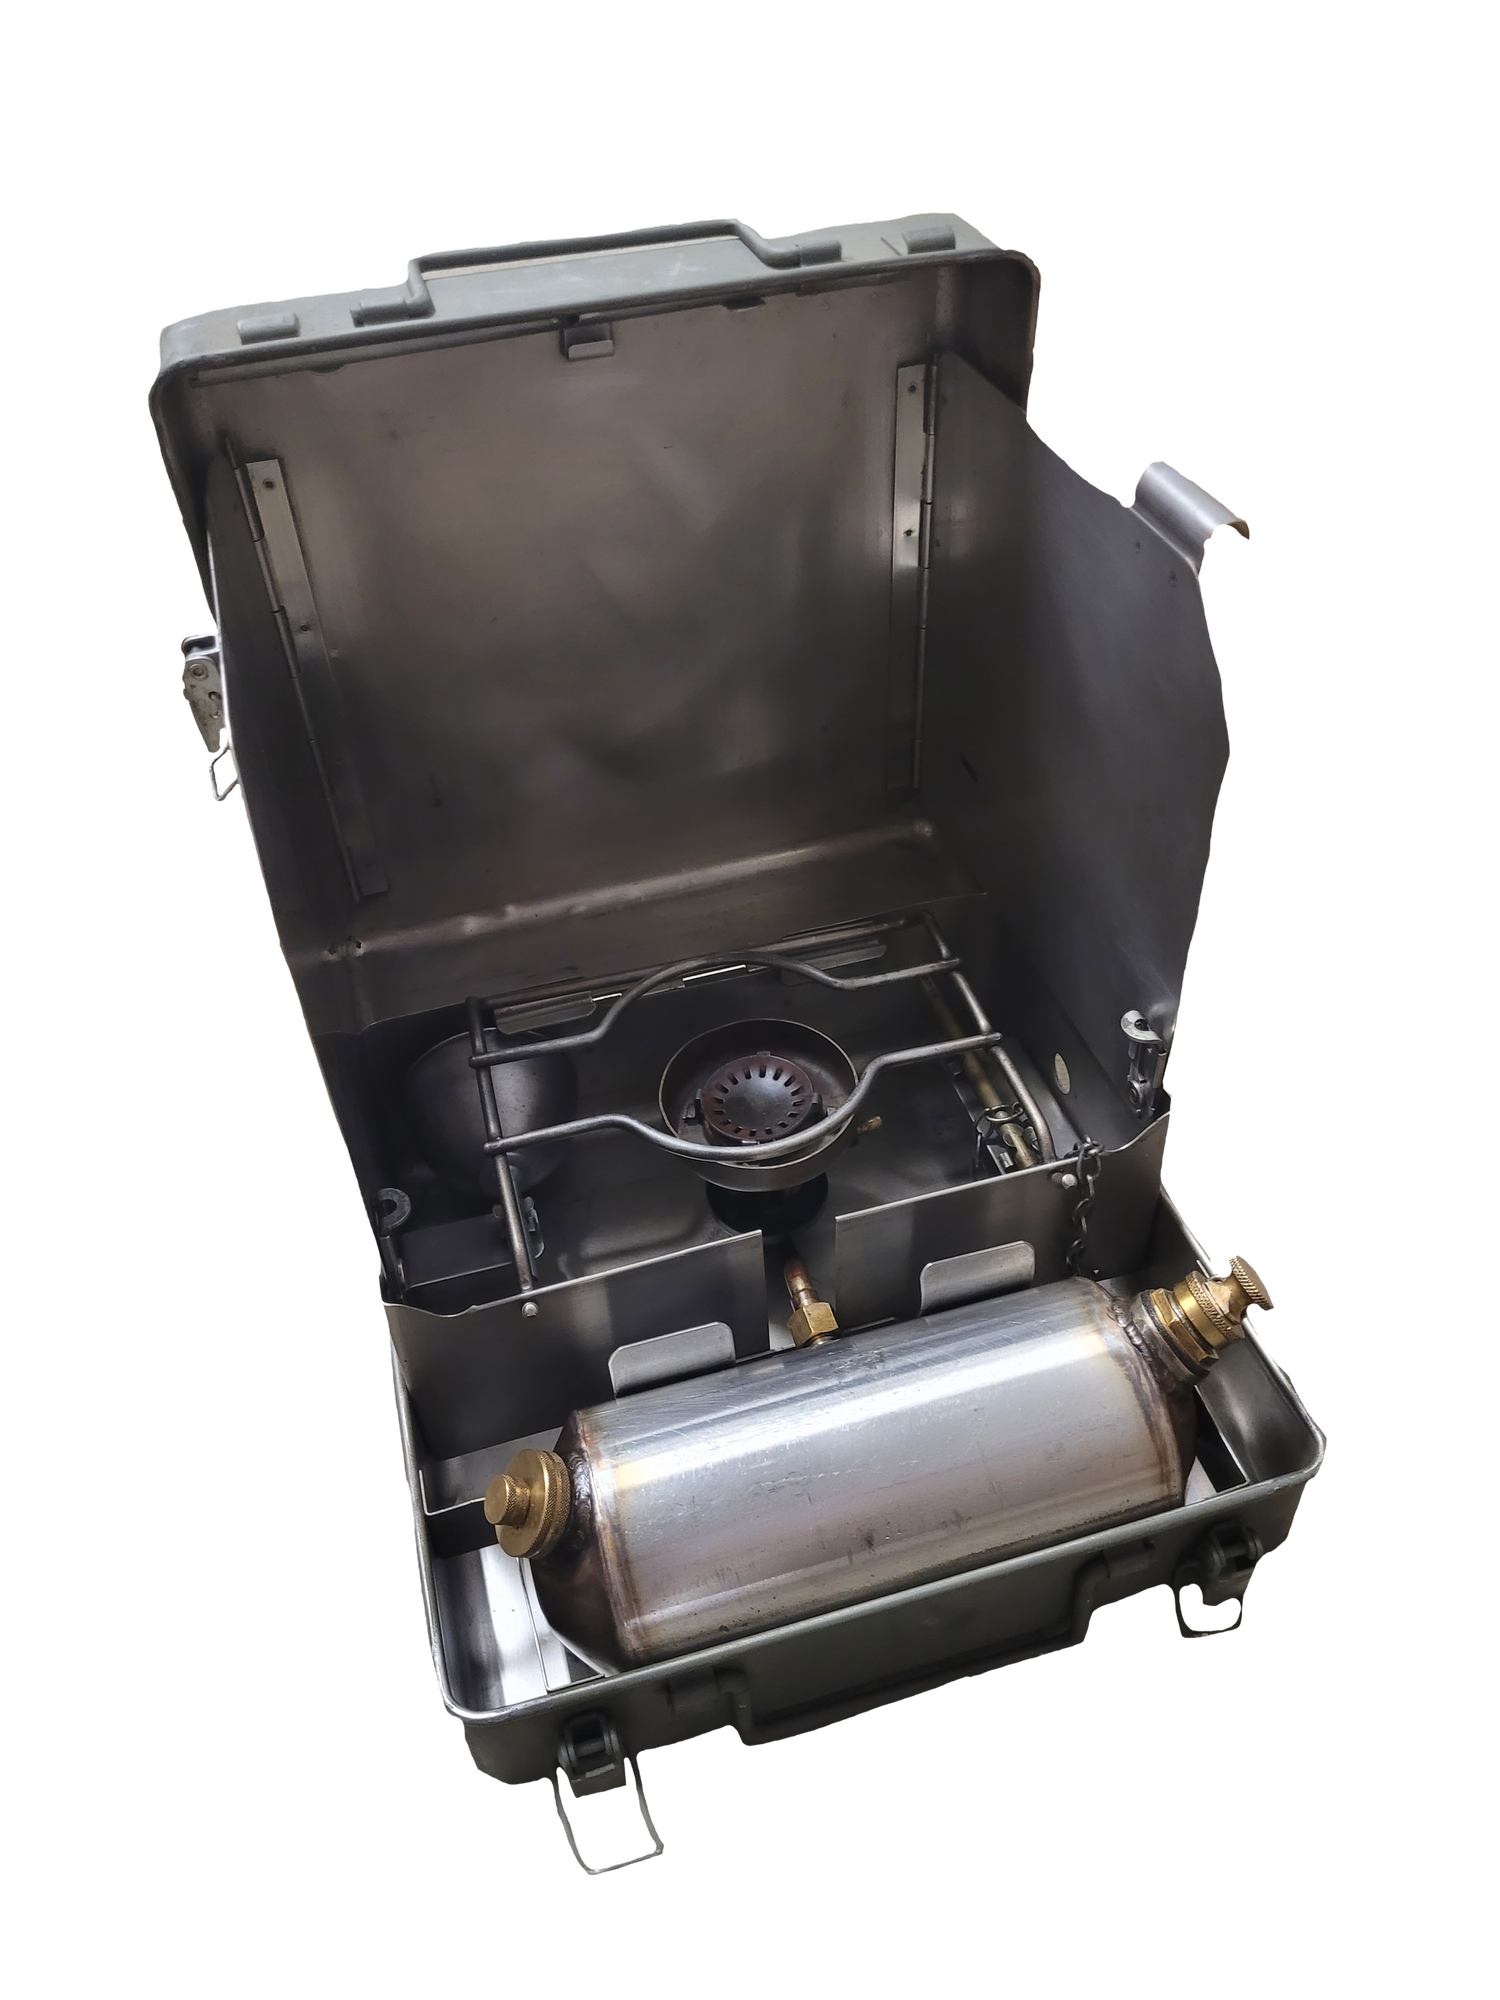 COOKER NO.12 BRITISH ARMY DIESEL STOVE-